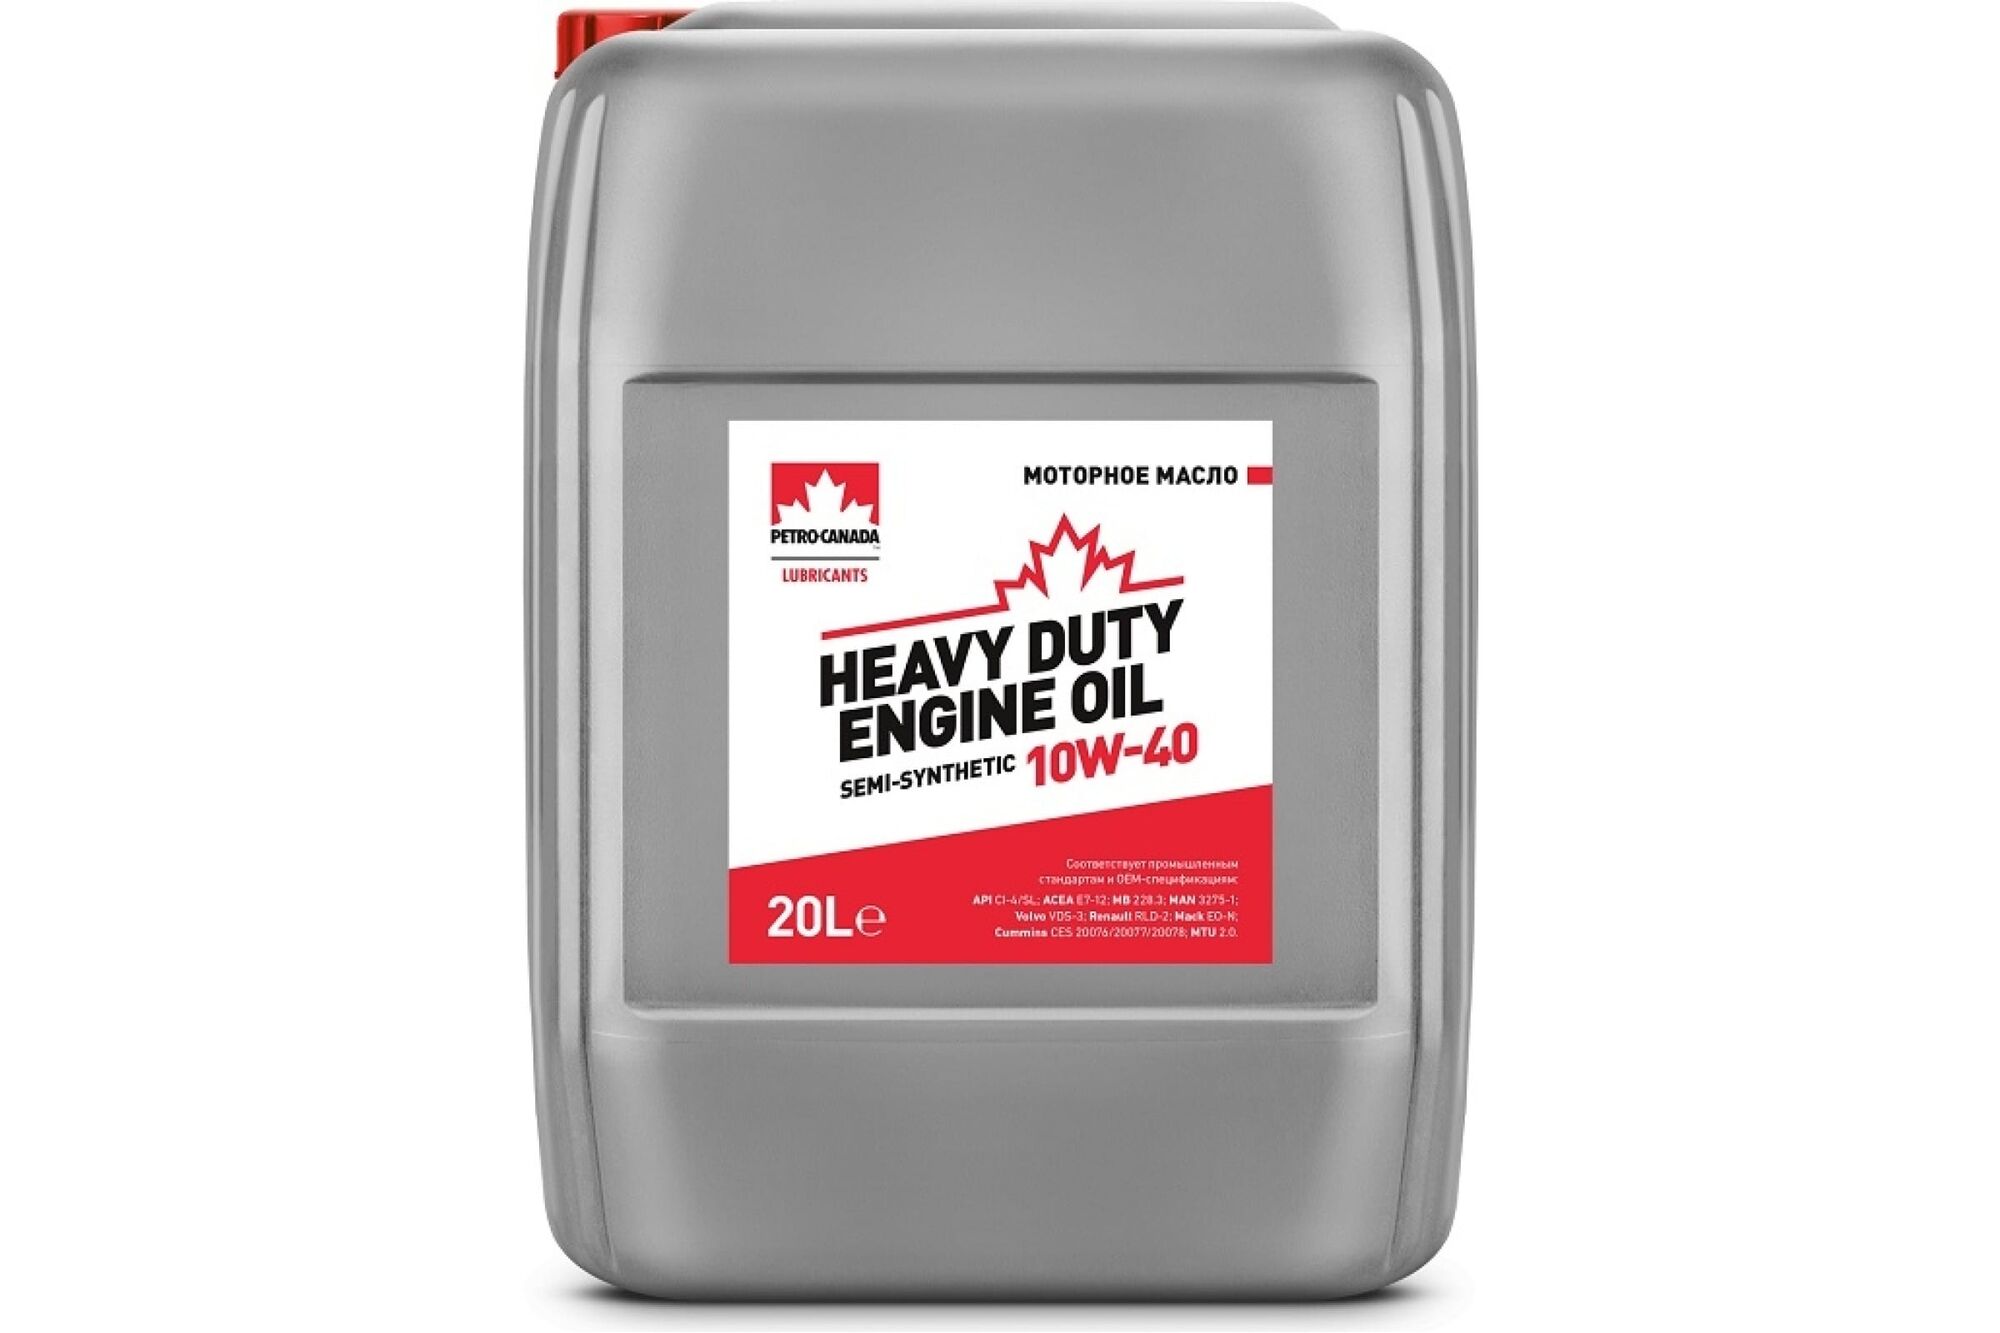 Моторное масло PETRO-CANADA Heavy Duty Engine Oil Semi-Synthetic 10W-40, 20 л PCHDEOSS14PL20 Petro-Canada